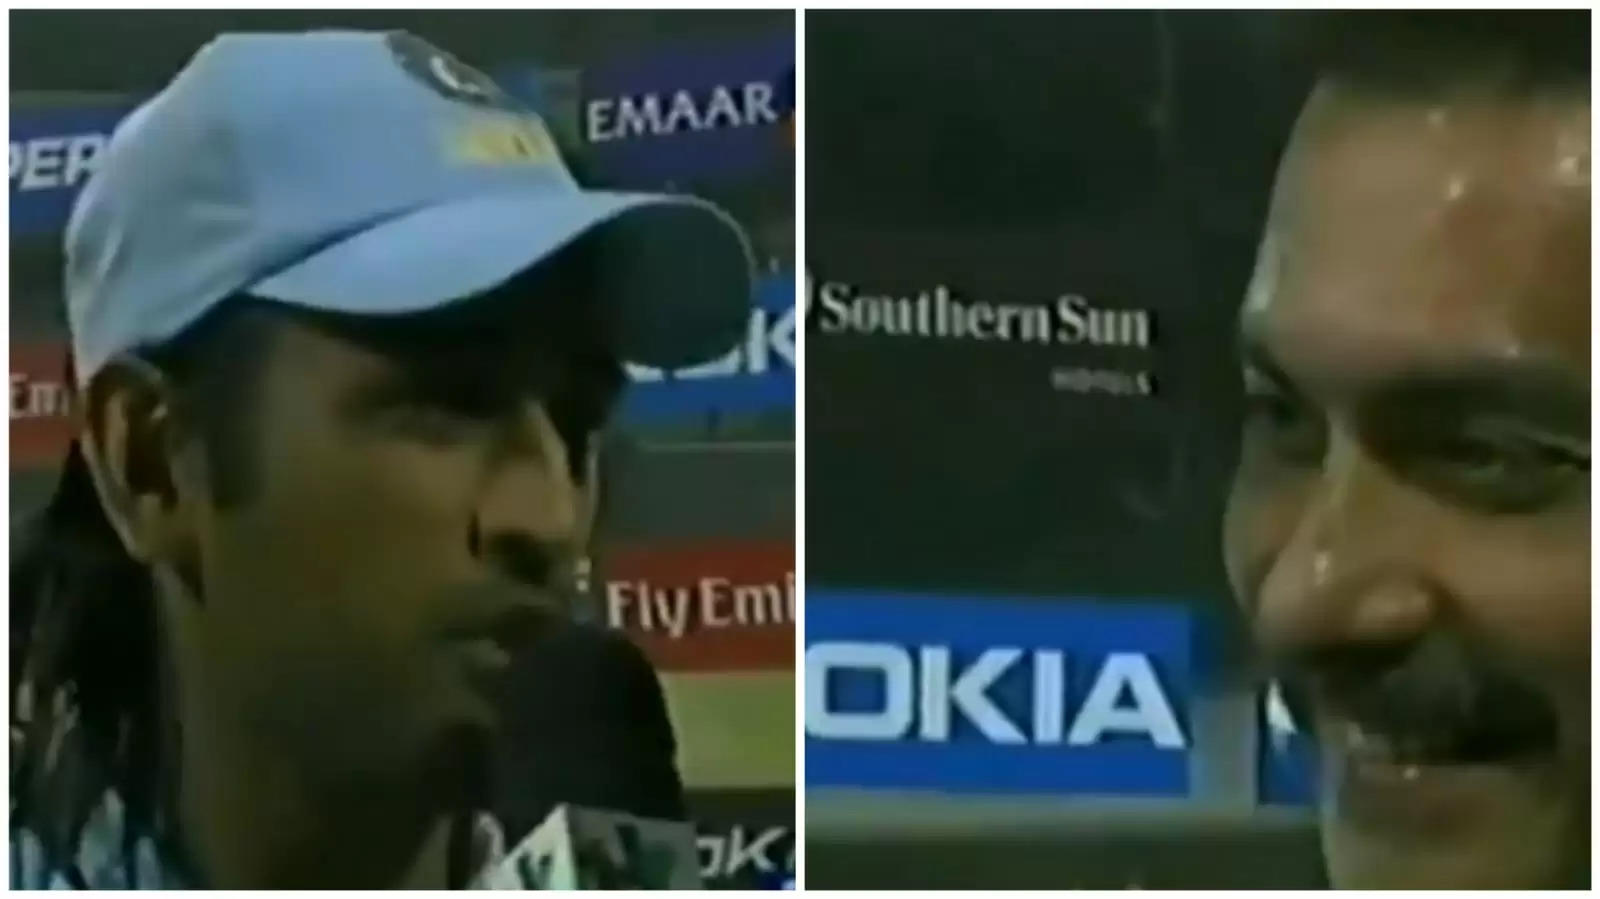 WATCH: ‘We proved you wrong’ – Dhoni mocks Shastri after 2007 T20 World Cup semifinal win